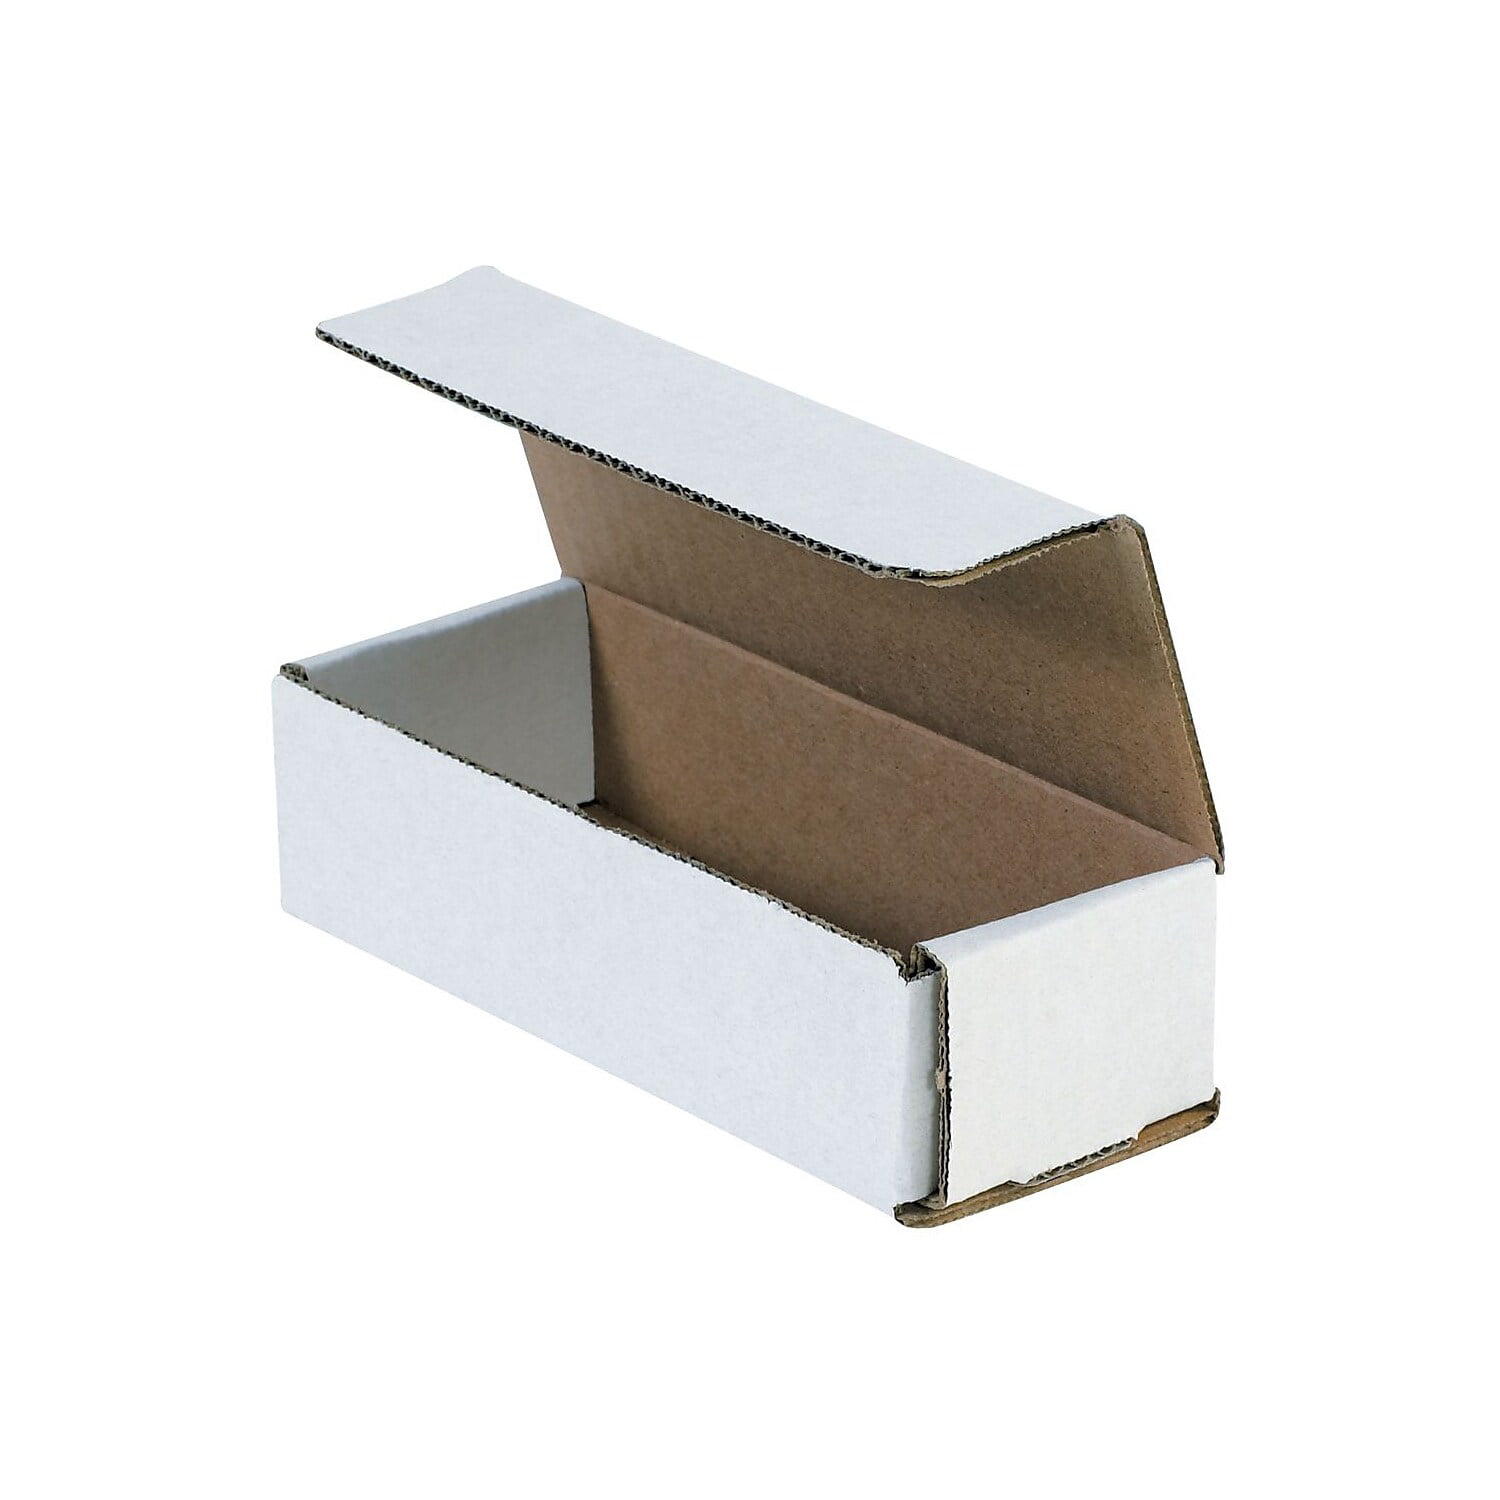 100 Pack 4x4x4 White Corrugated Shipping Mailer Packing Box Boxes 4" x 4" x 4" 